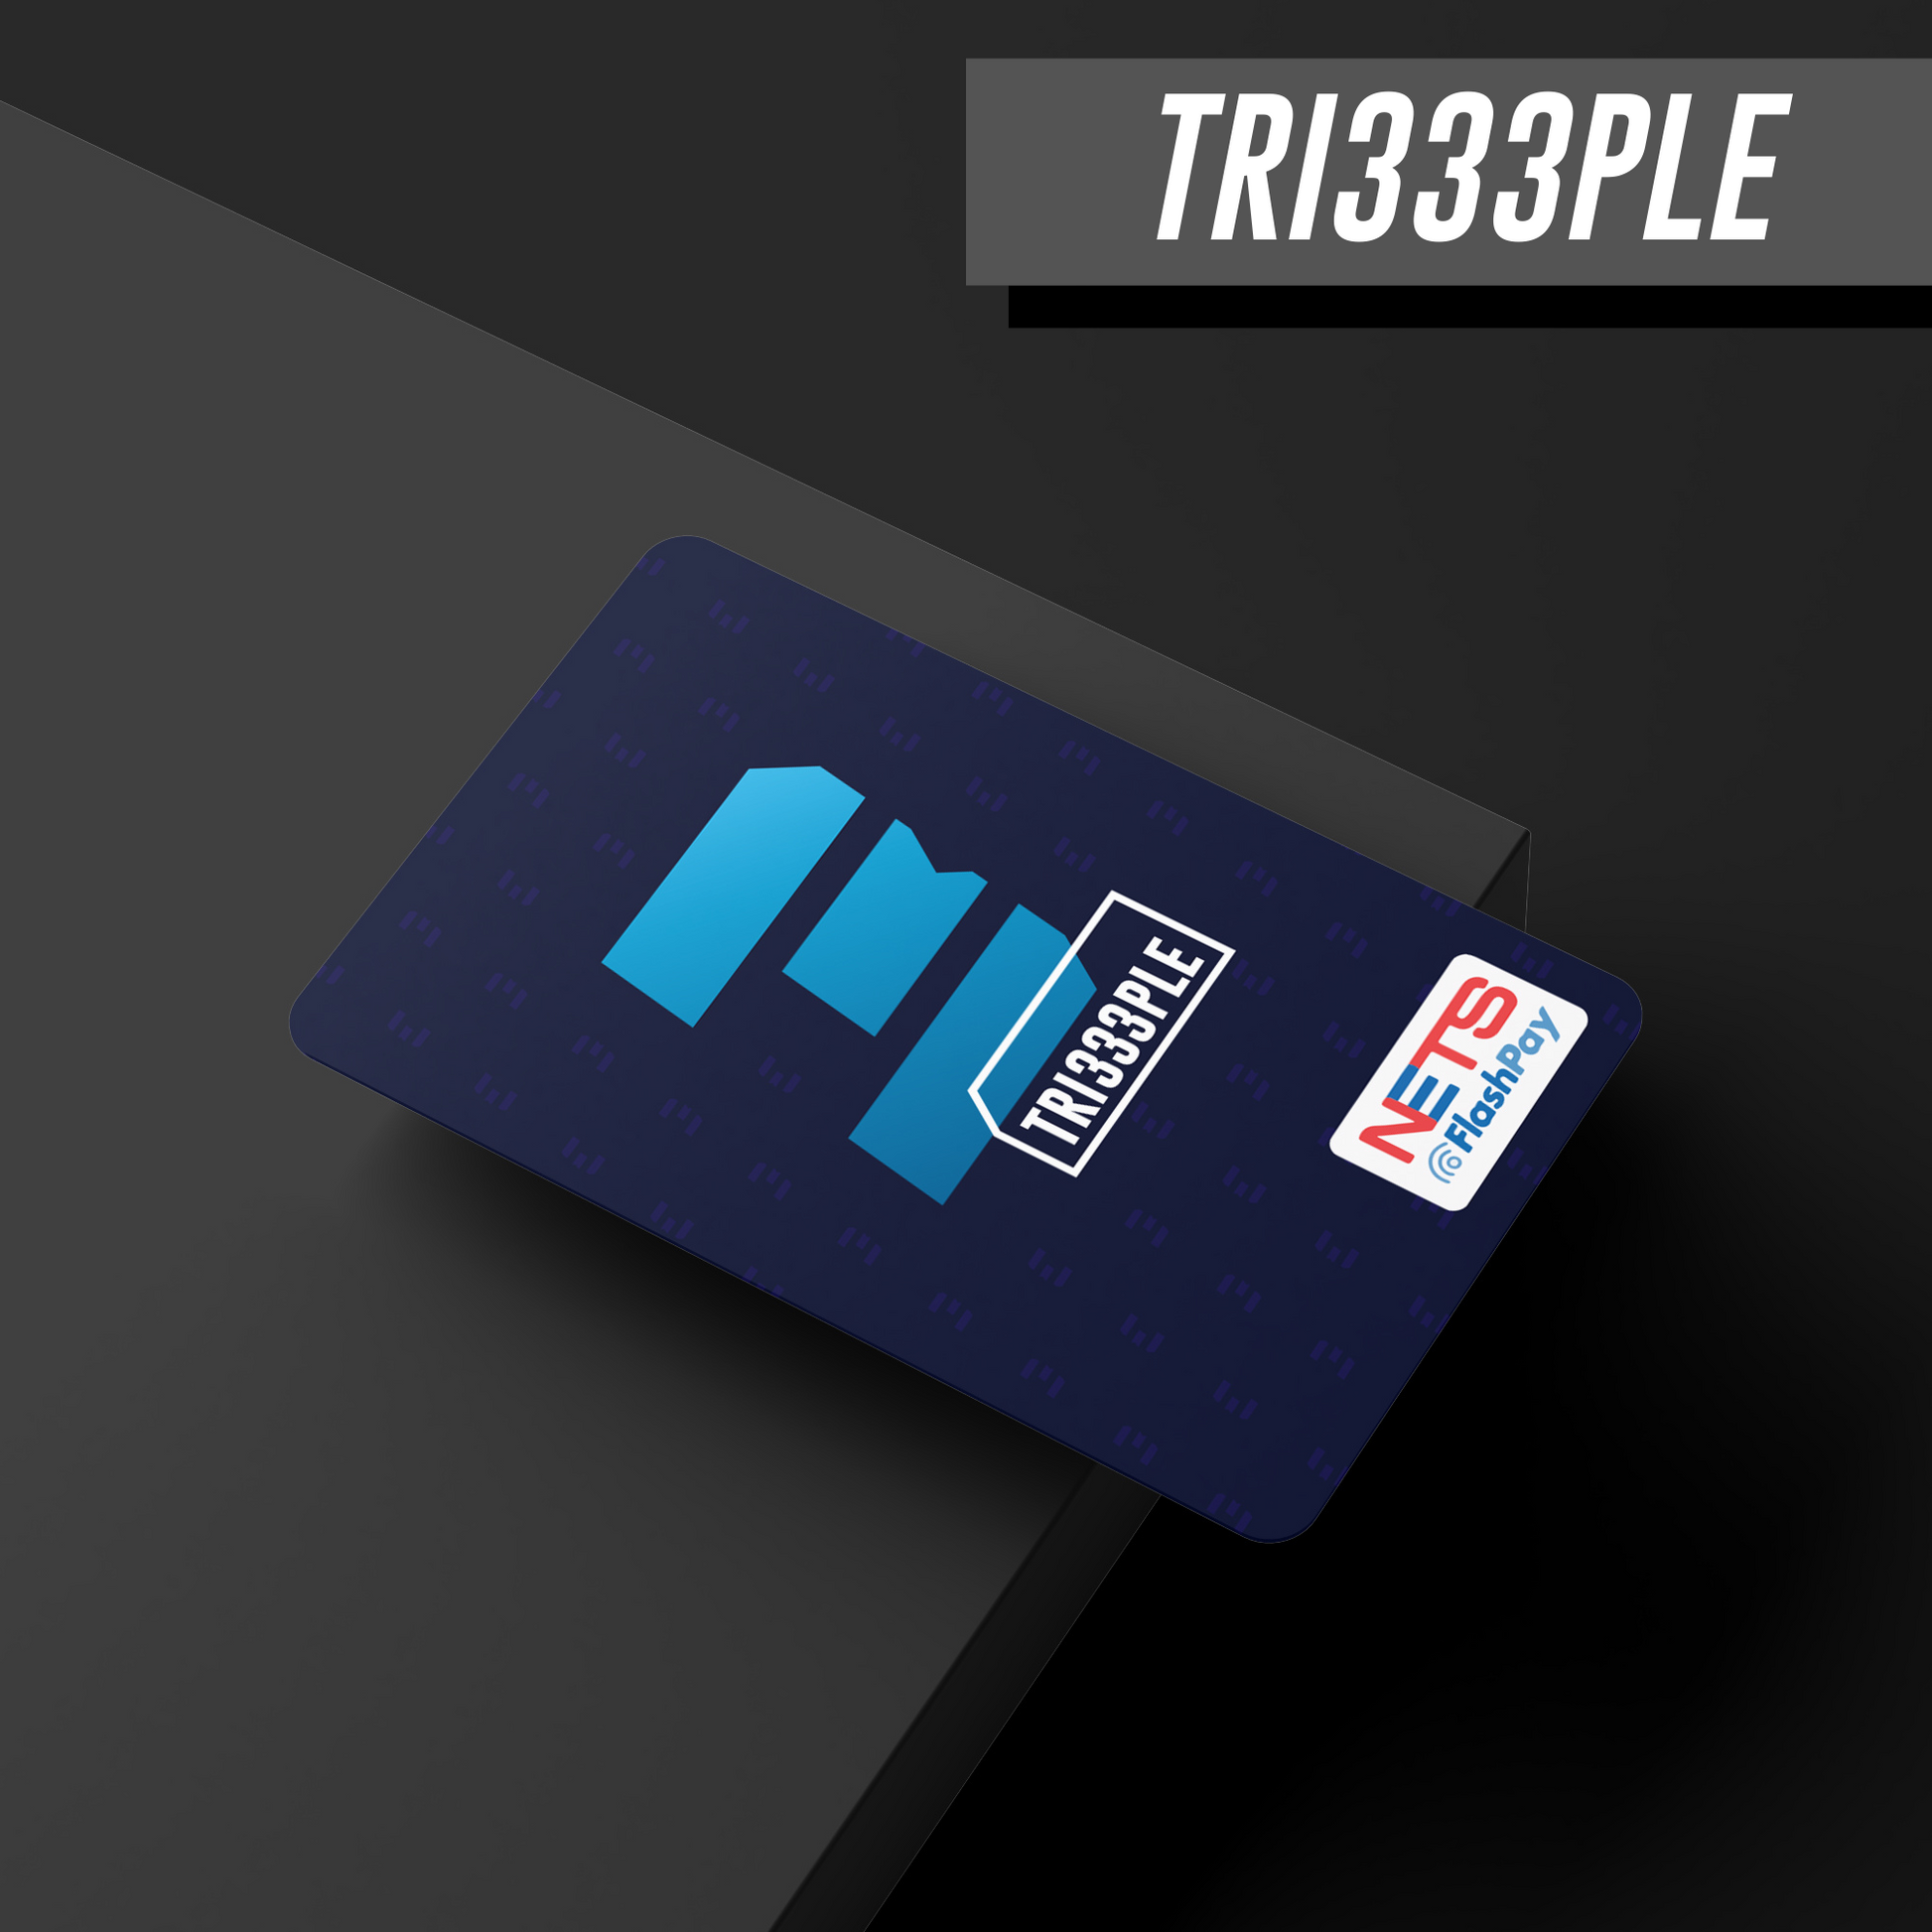 tri333ple official nets flashpay card on table